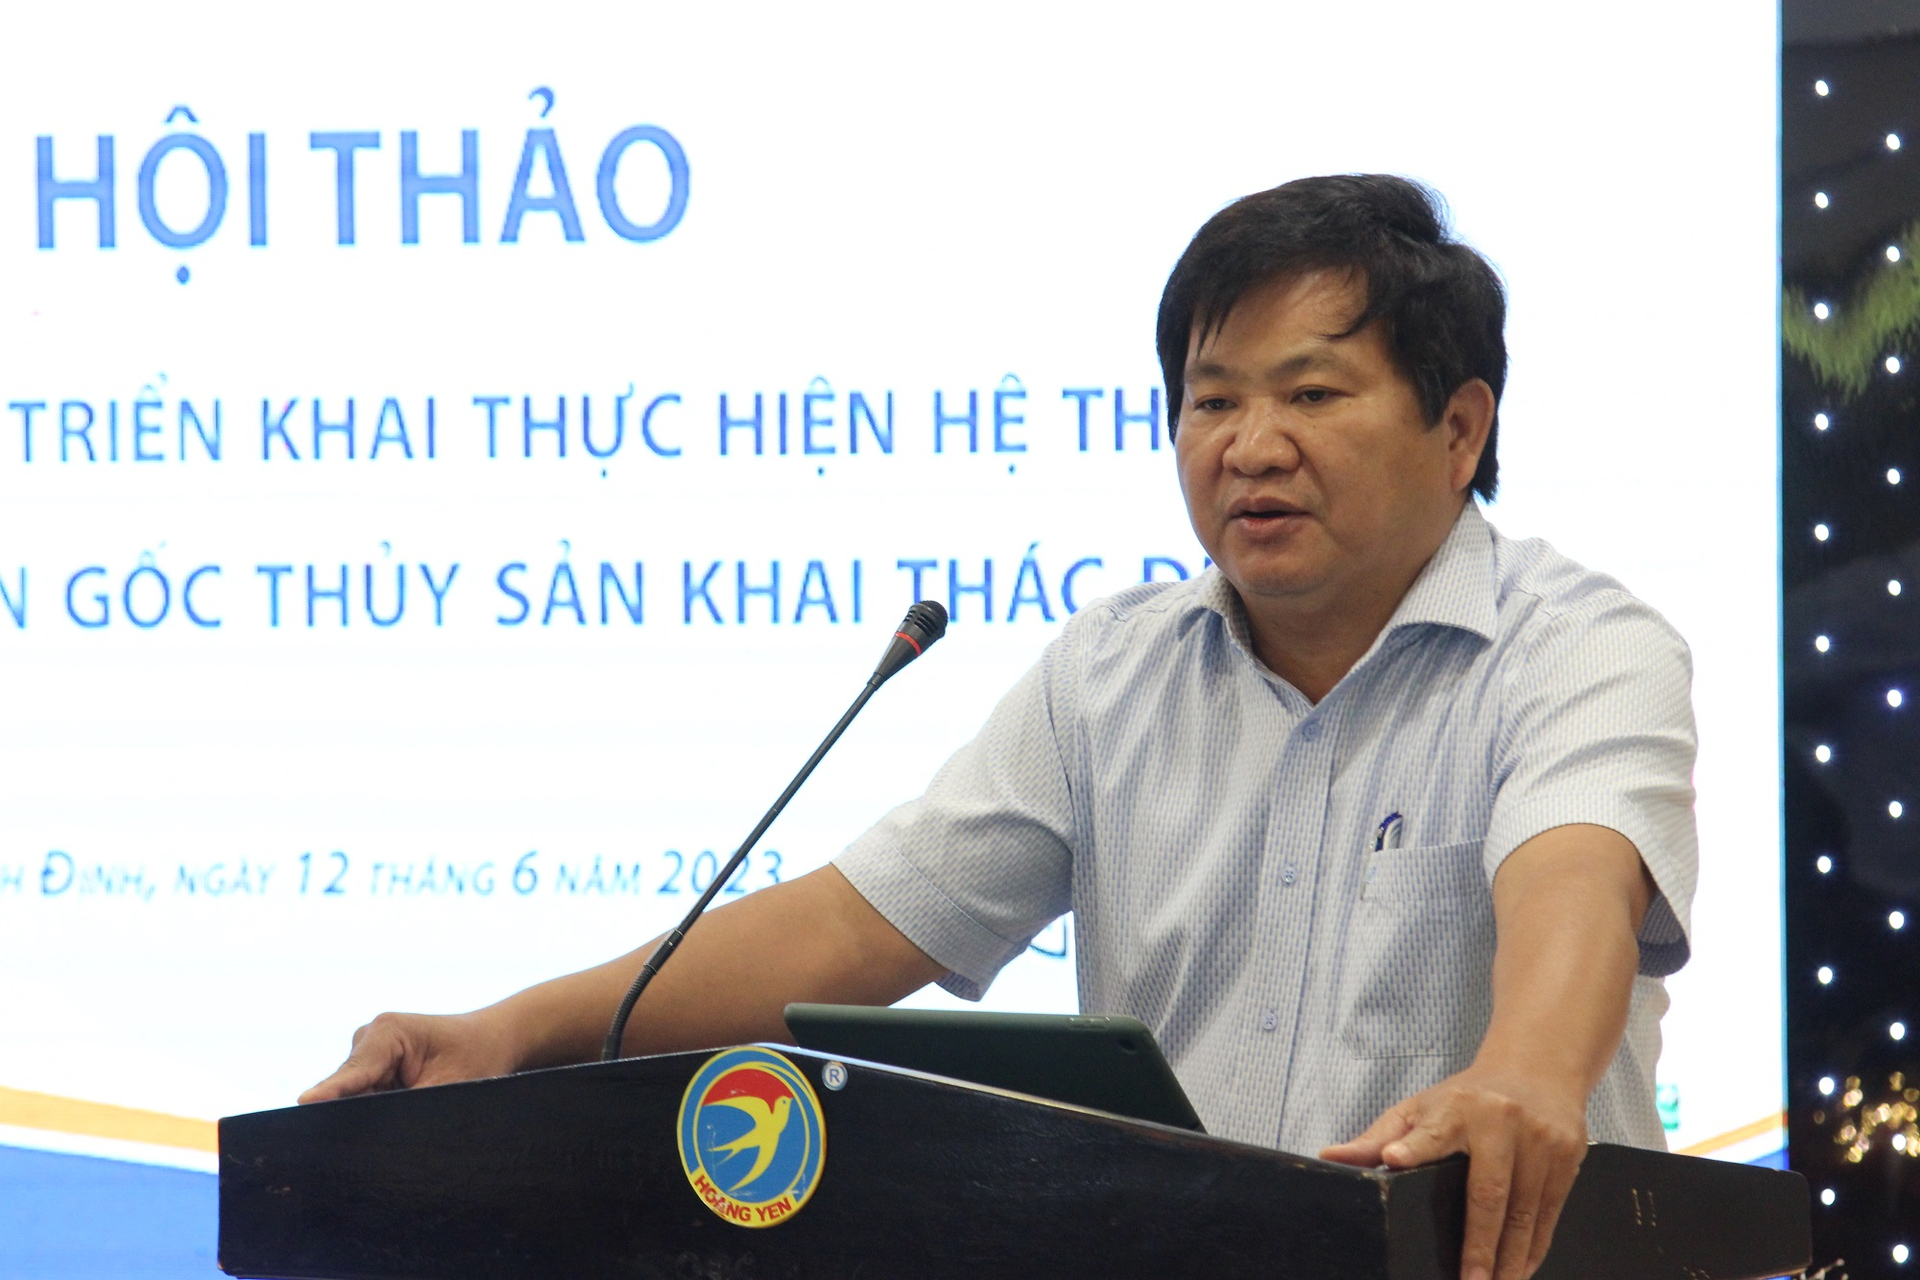 Mr. Tran Van Phuc, Director of Binh Dinh Department of Agriculture and Rural Development, at the workshop. Photo: V.D.T.